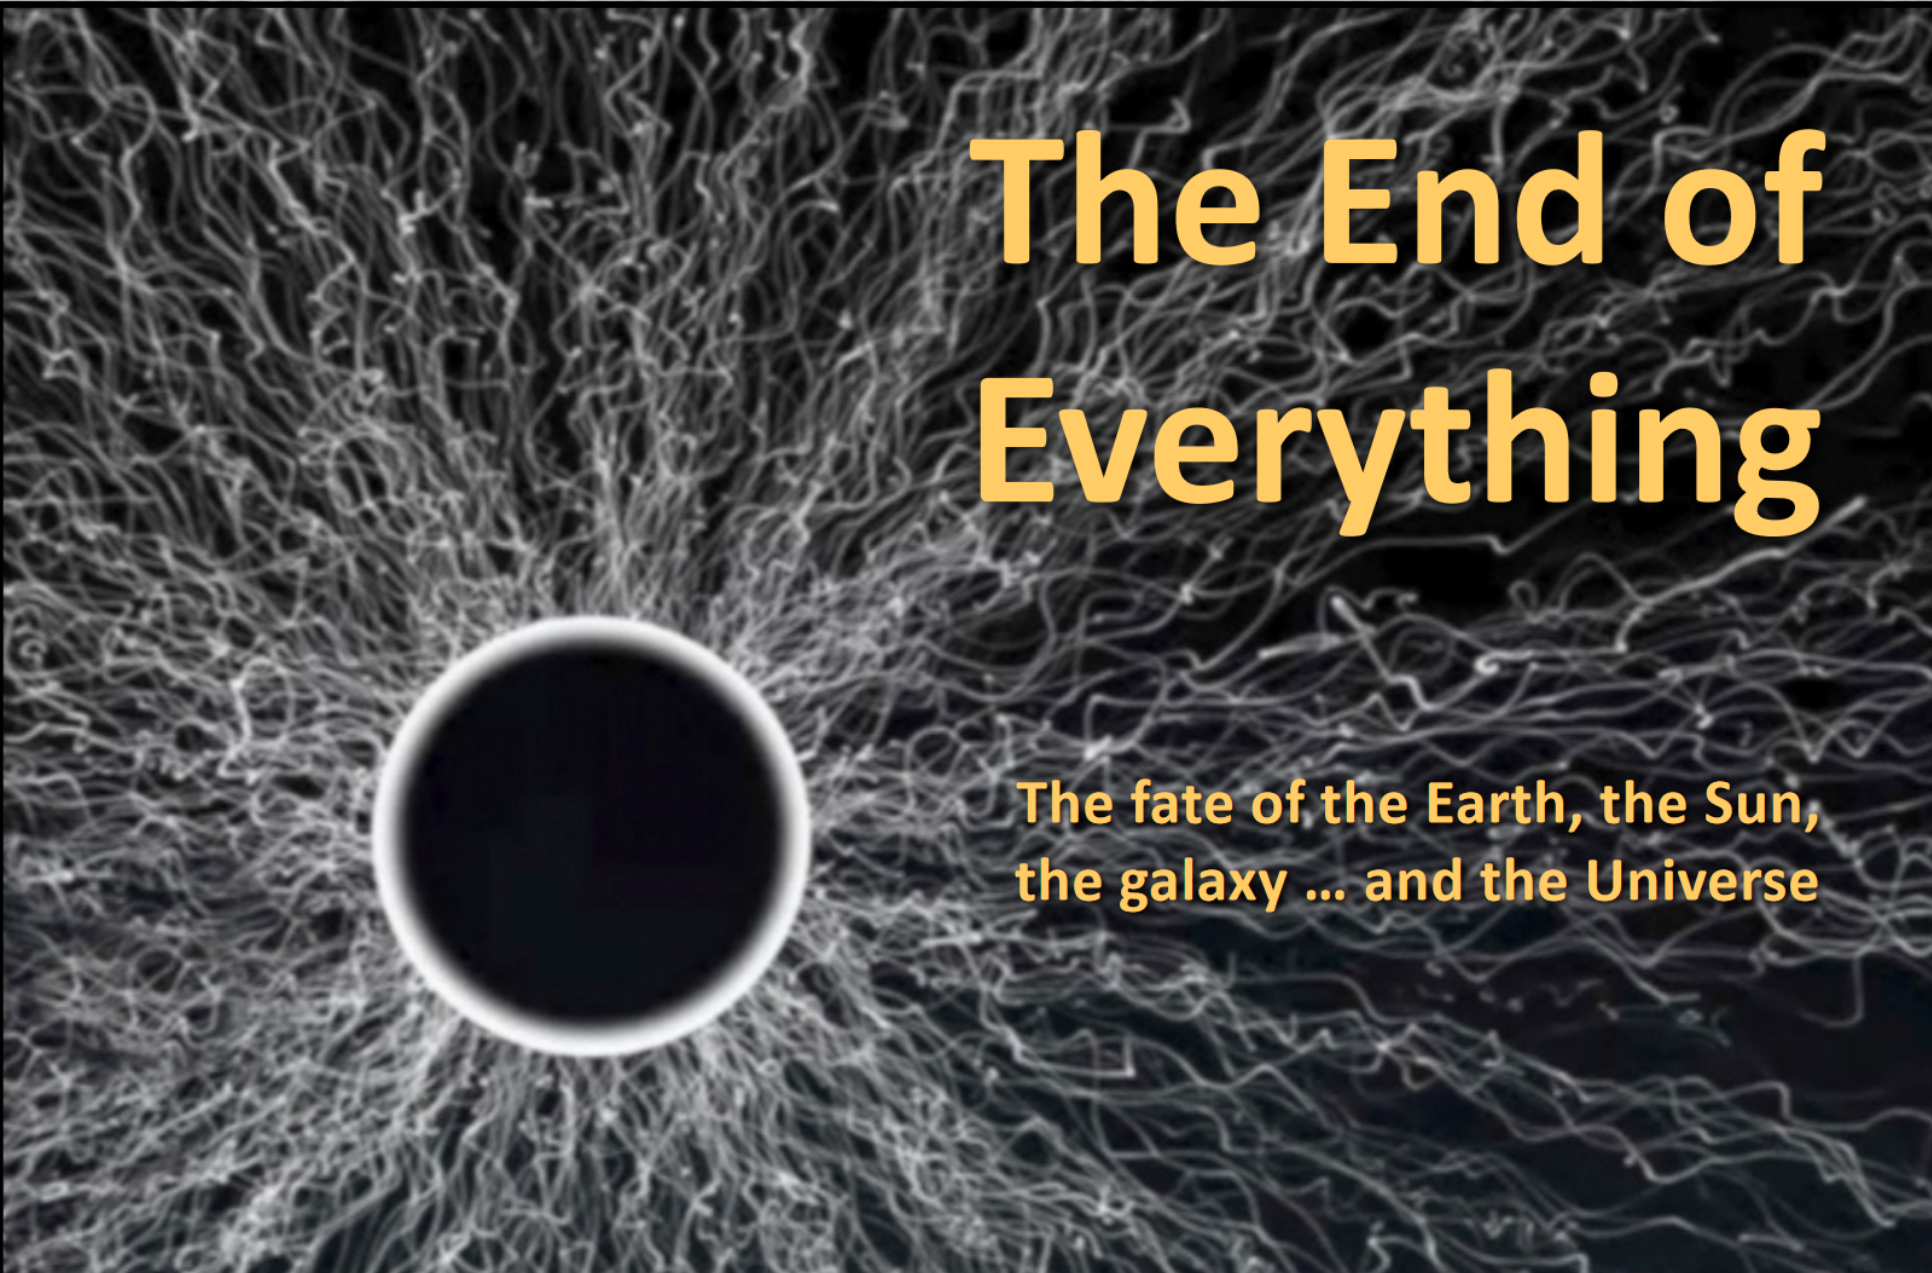 An image of a mysterious, black void surrounded by a white ring, perhaps an event horizon? Innumerable streamers are coming from the surface of the ring, like electricity. There is no scale given, so we could br seeing anthing from a proton to a super-massive black hole. The image is energetic! It says "The End of Everything" : "The fate of the Earth, the Sun, …and the Universe"